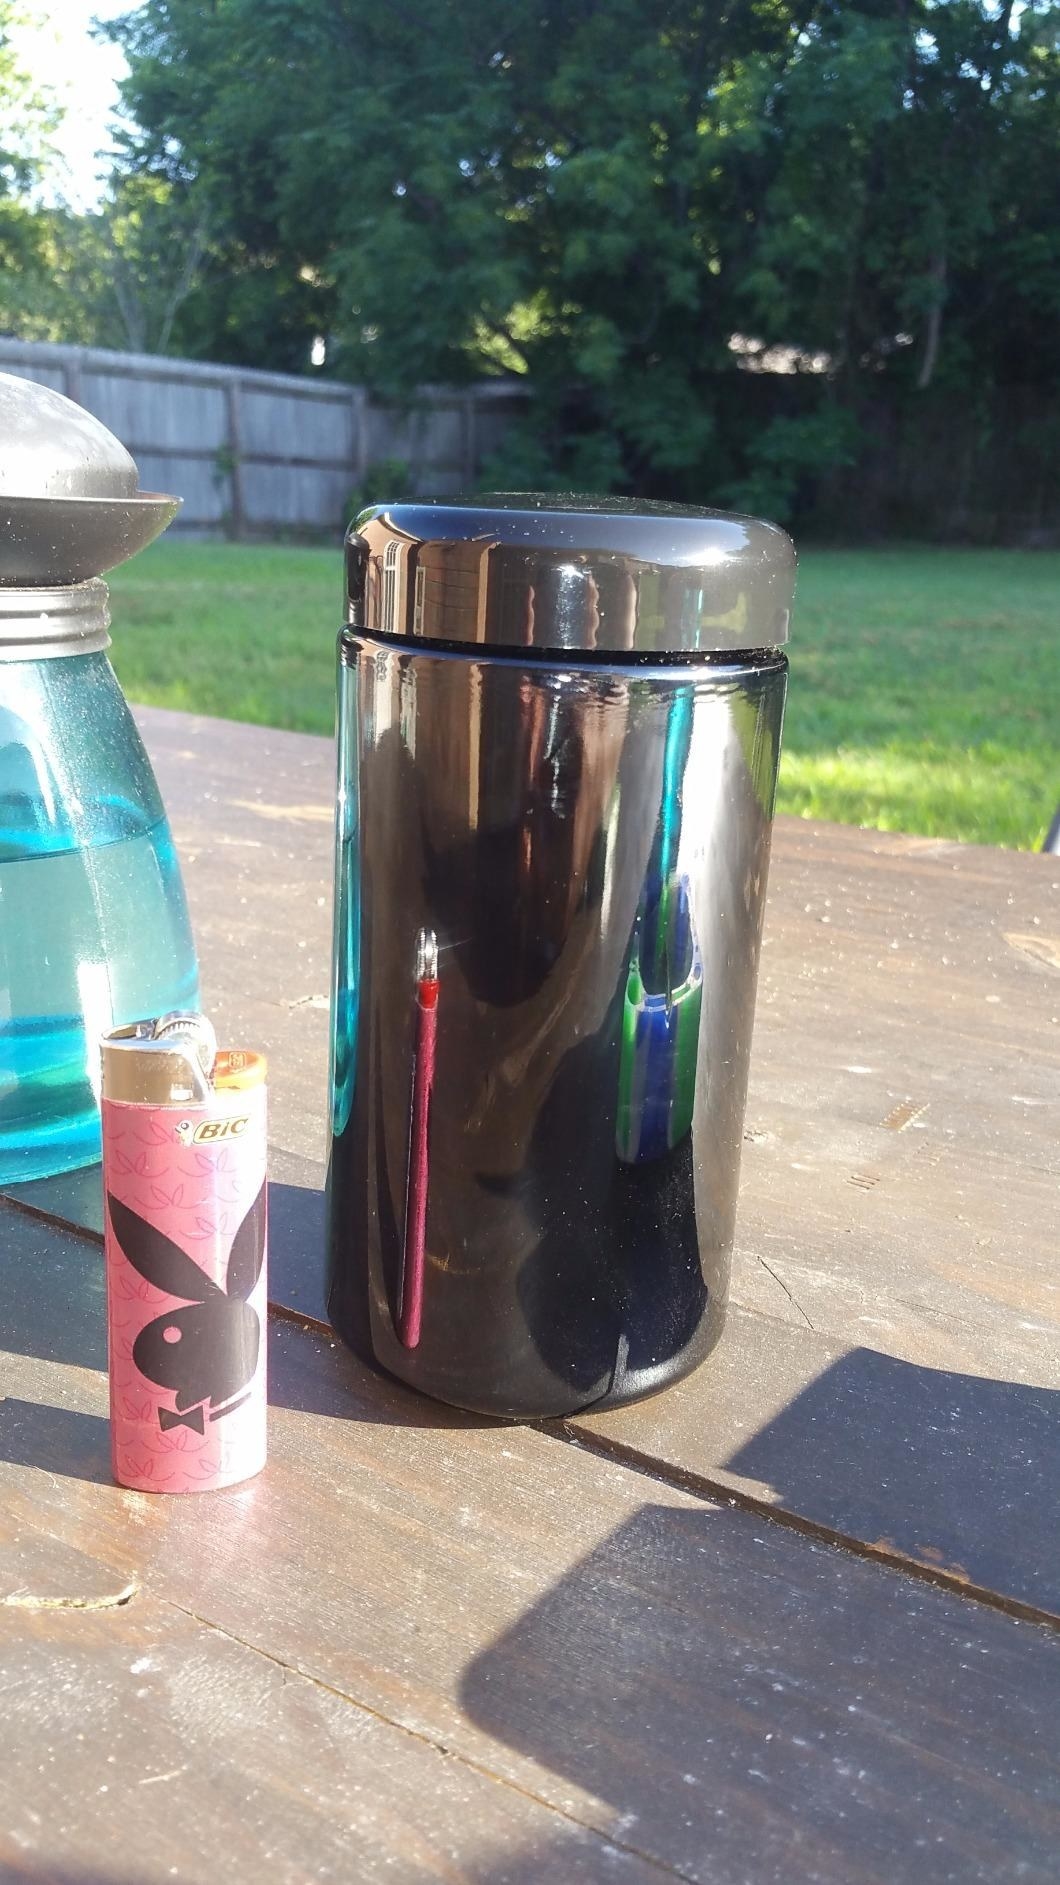 A reviewer compares the size of the jar to a lighter